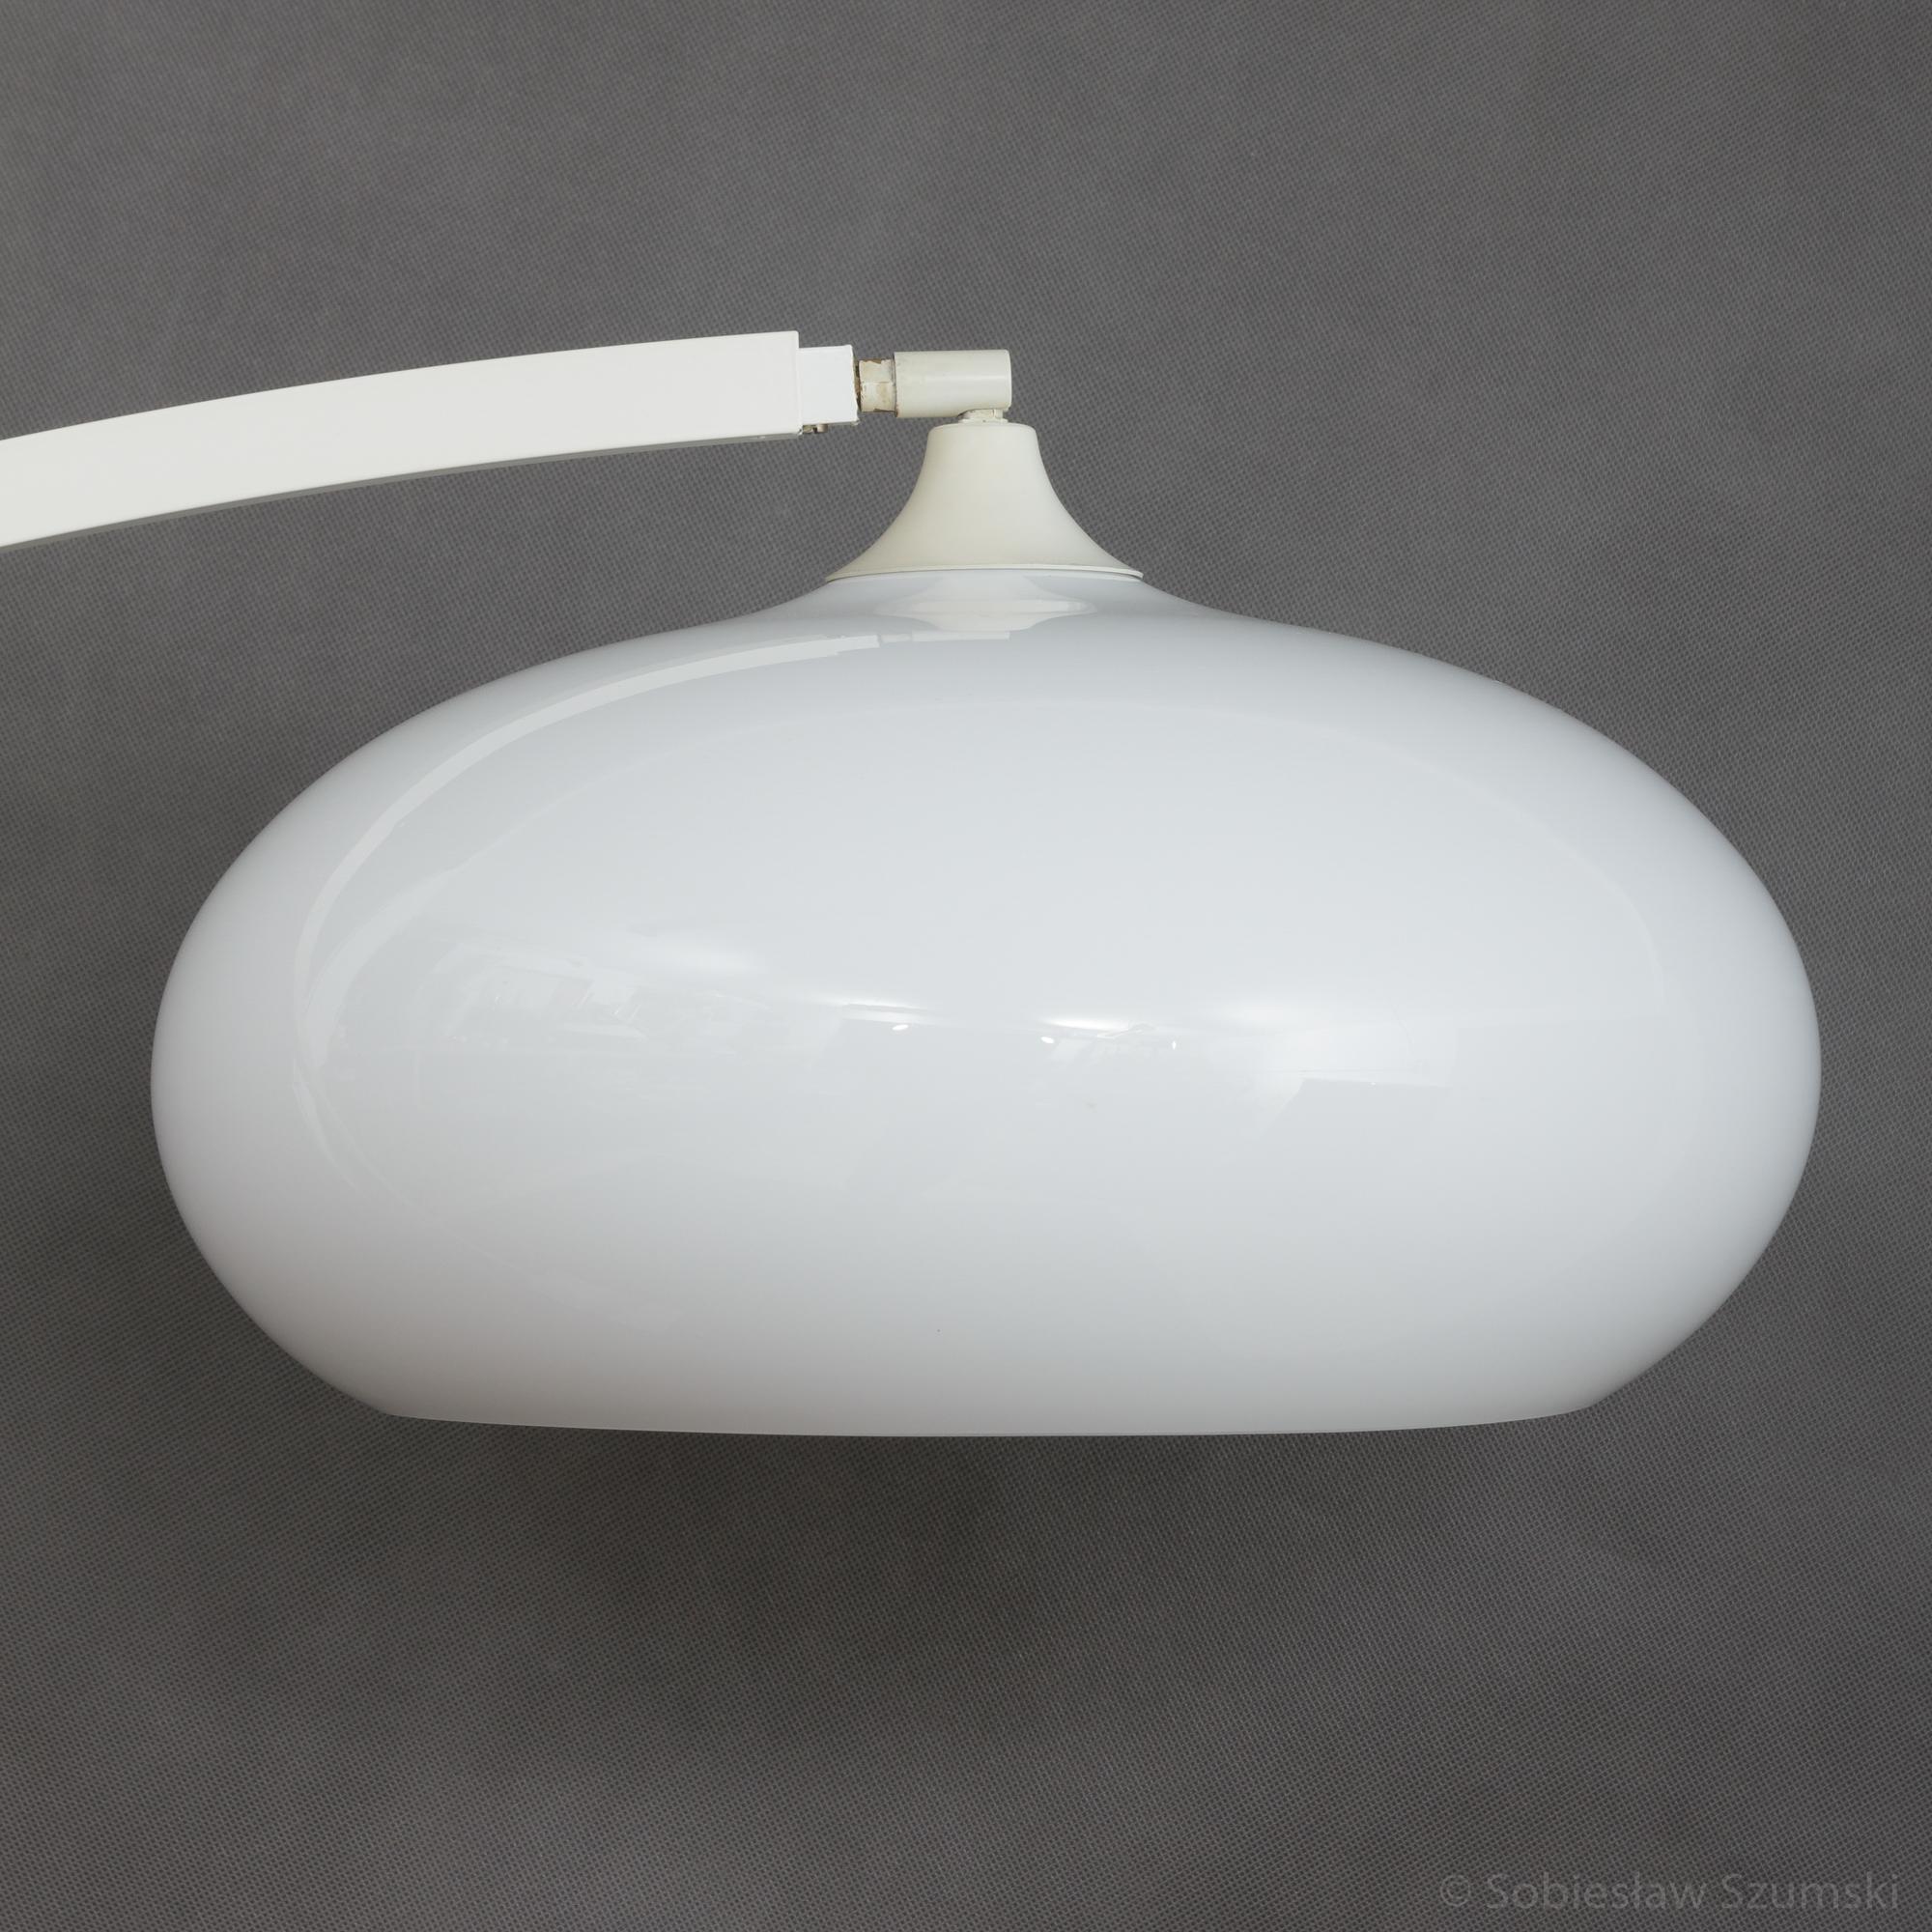 Italian extension arc lamp from the 1970s with marble base slim aluminum rod and acrylic shade. Full length over 2 meters. Original cord with a switch on the floor.